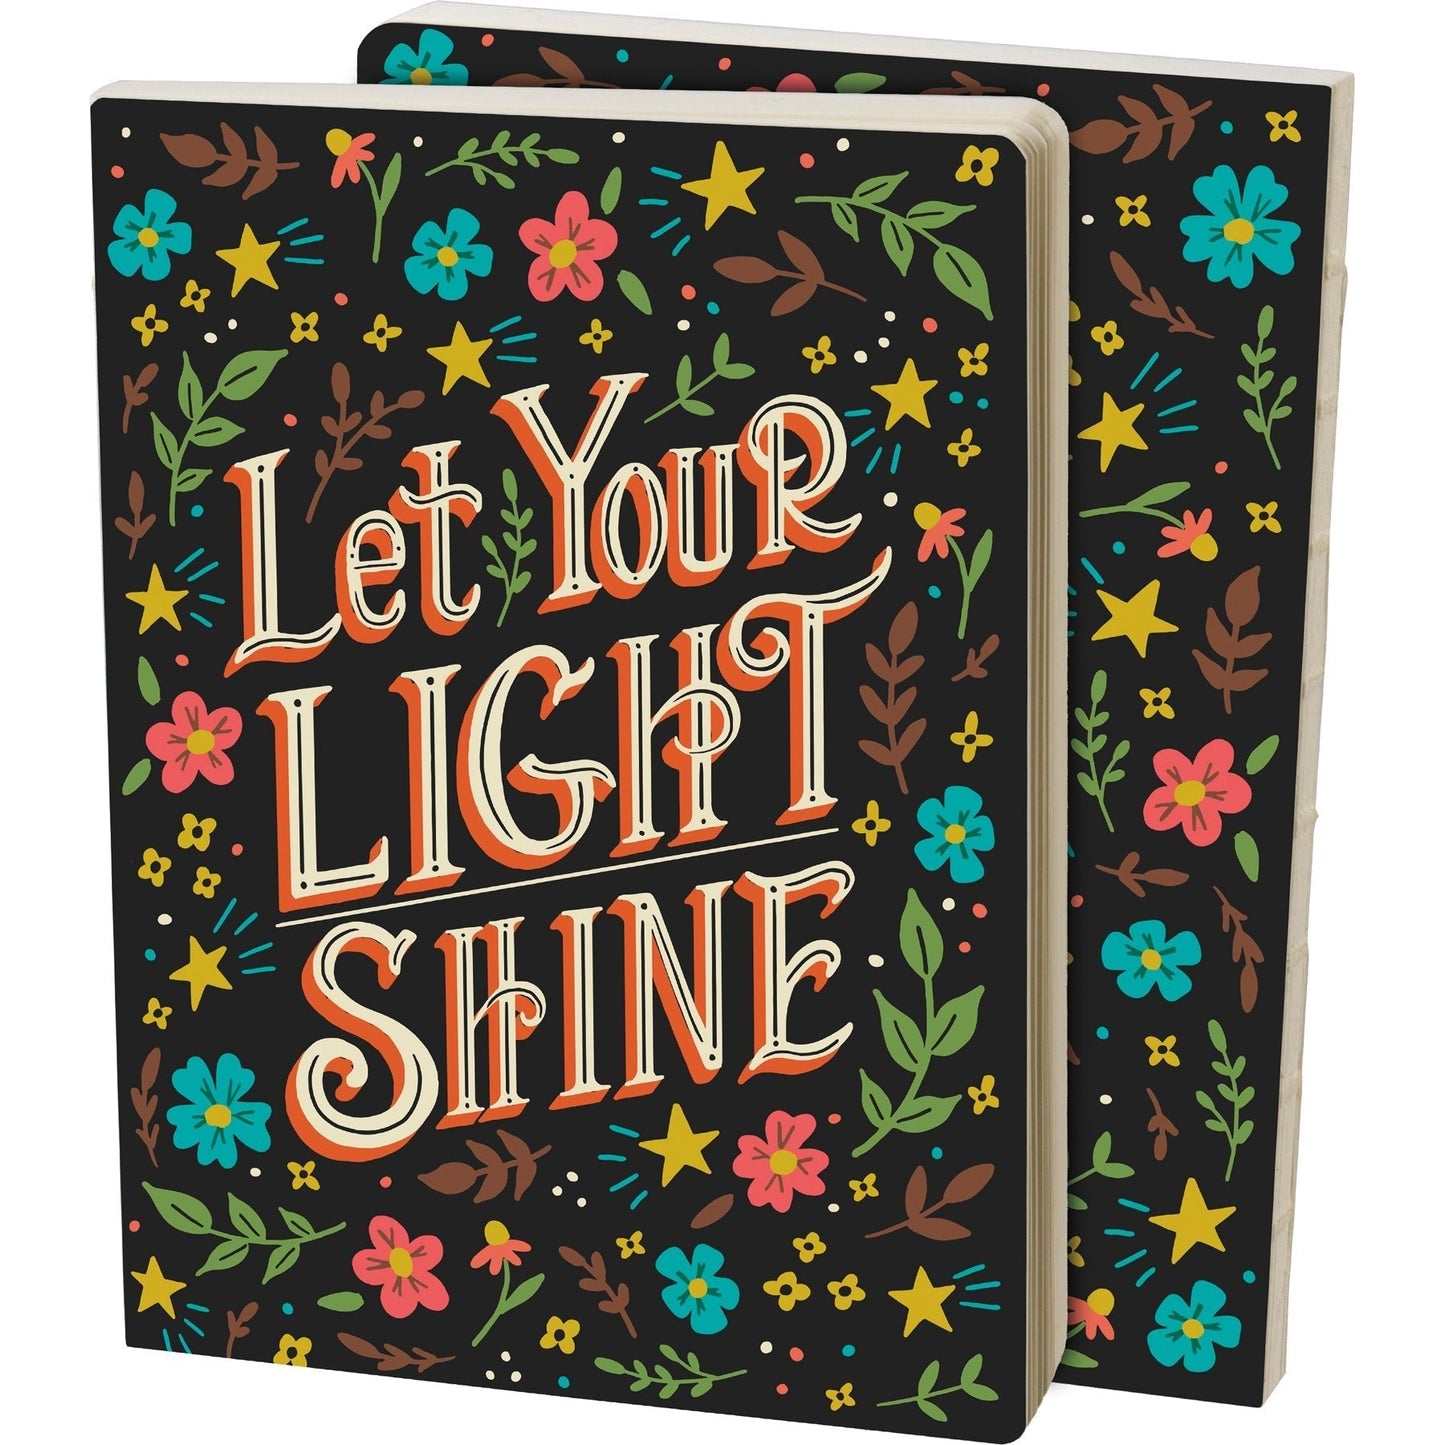 Let Your Light Shine Flower Double-Sided Journal | 160 lined pages